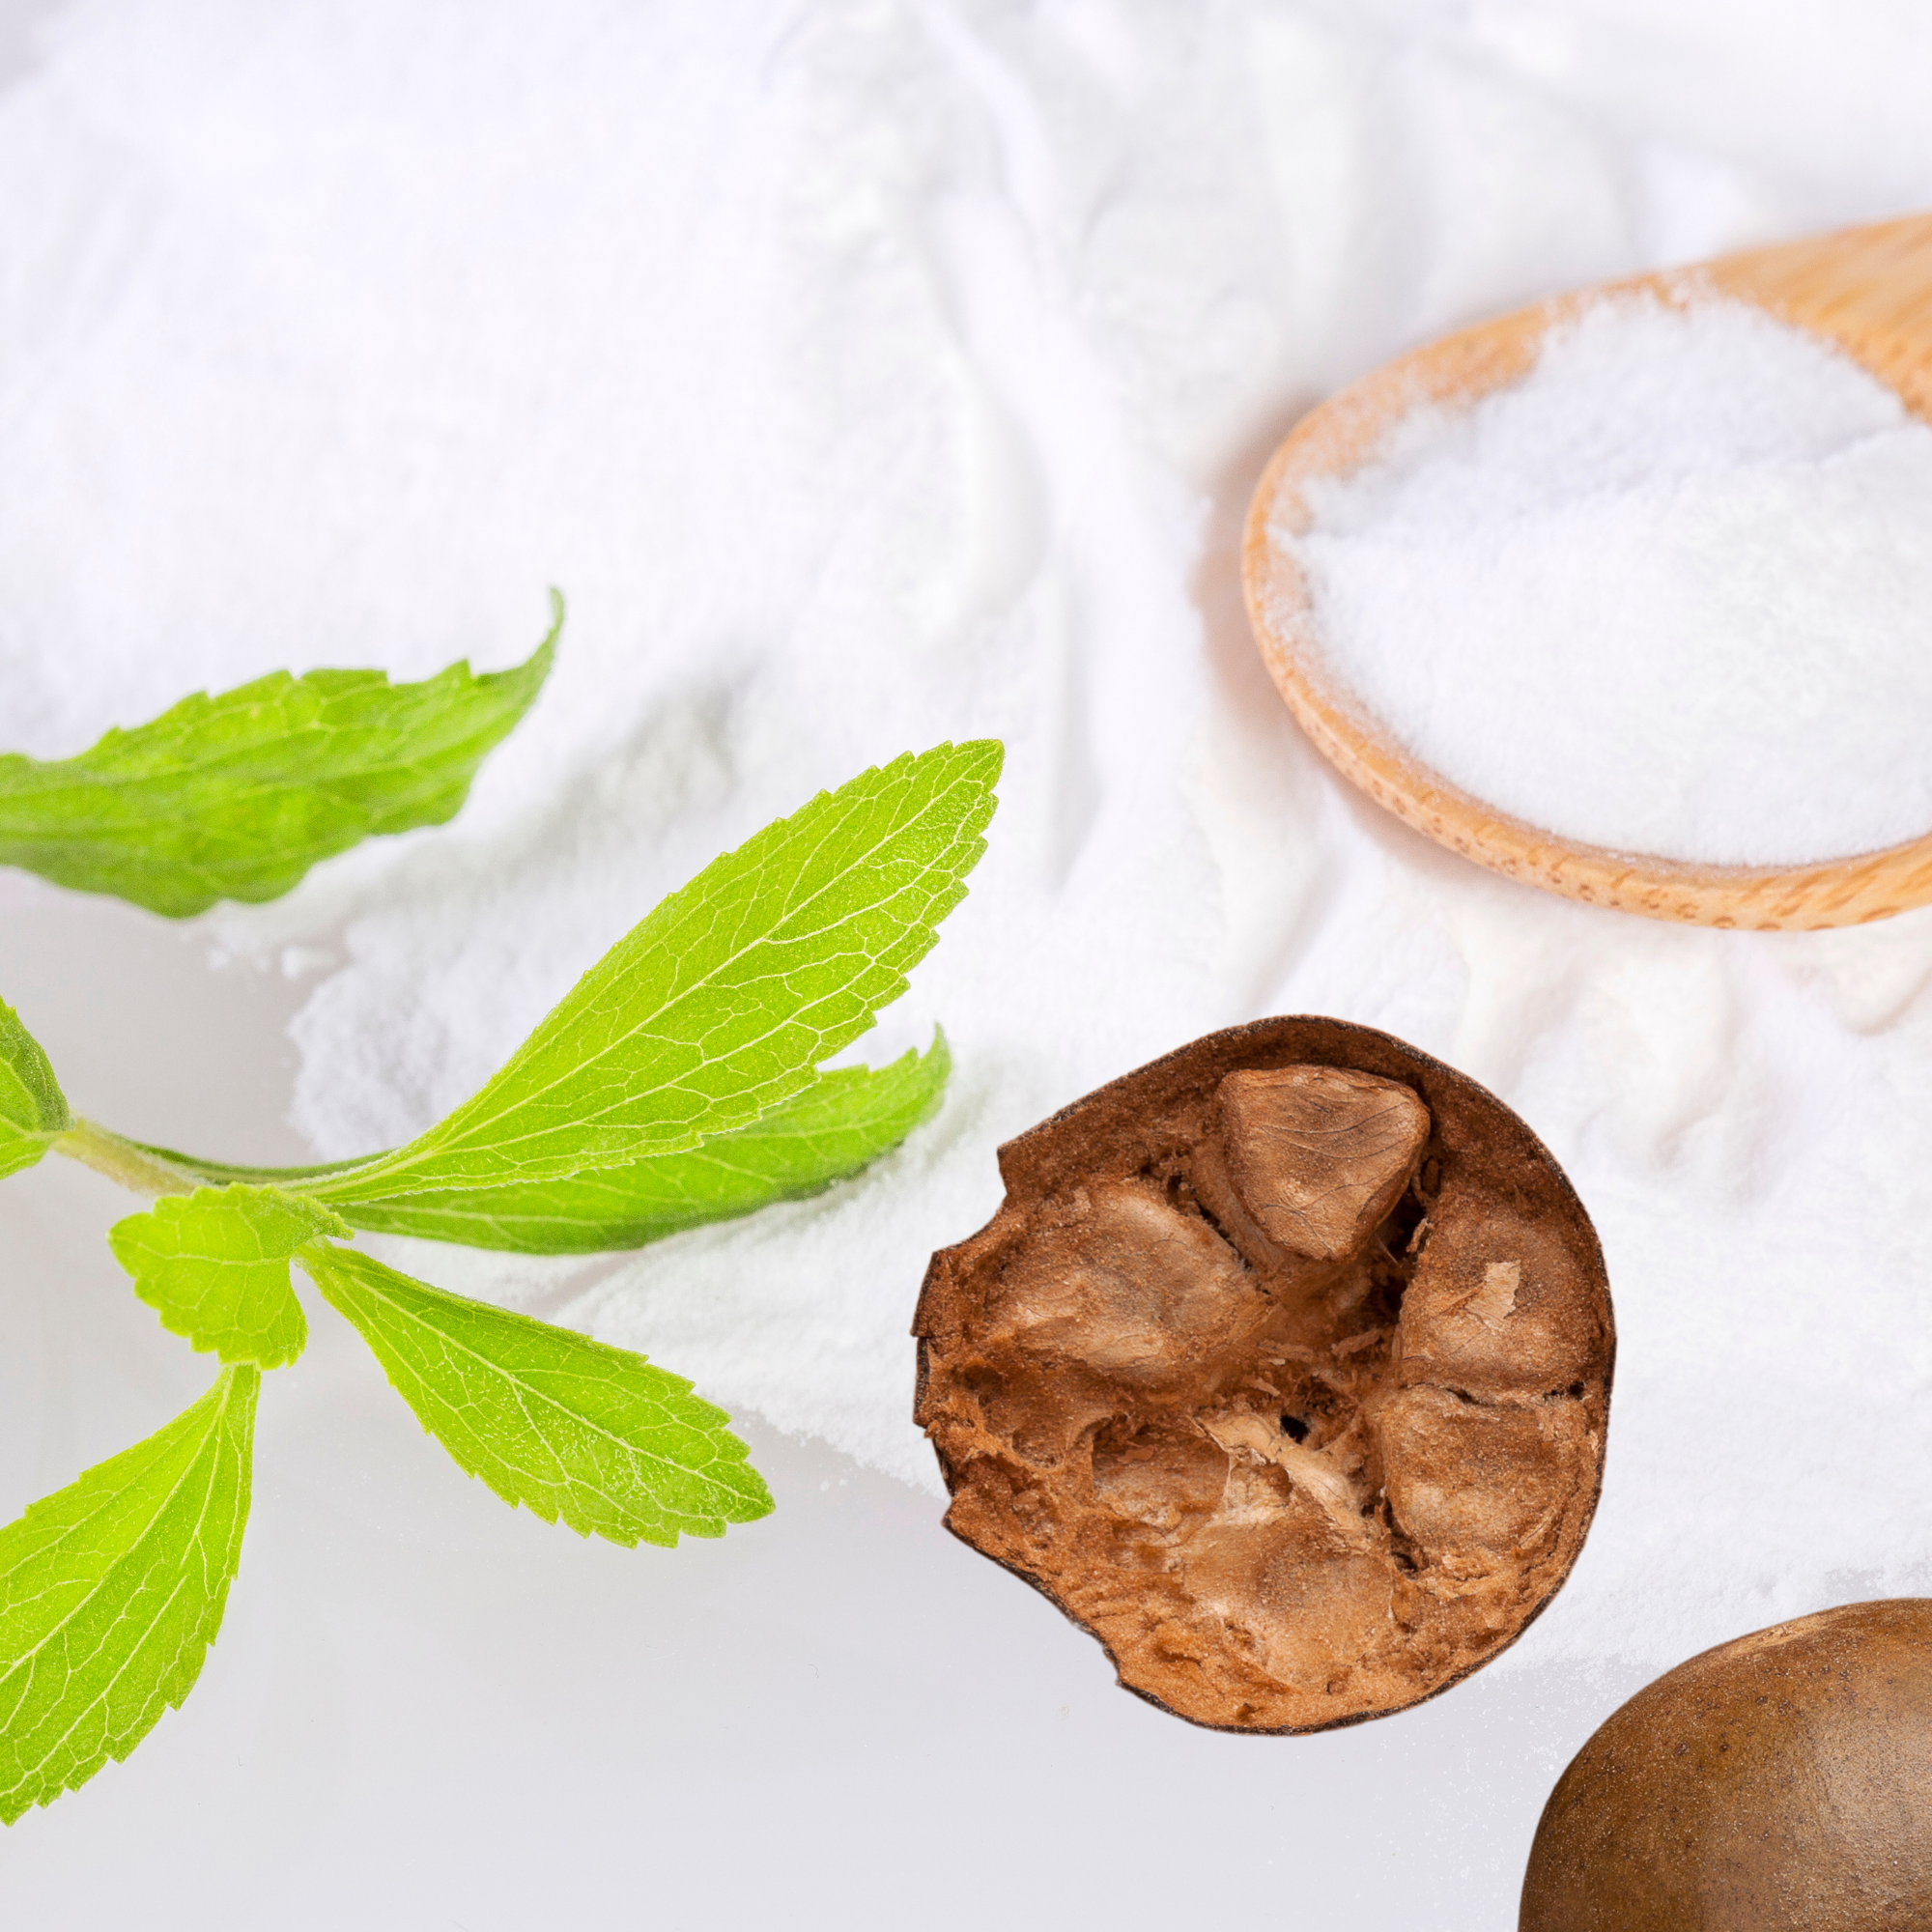 MonkVee Natural Sweeteners: What are the Differences Between Them?